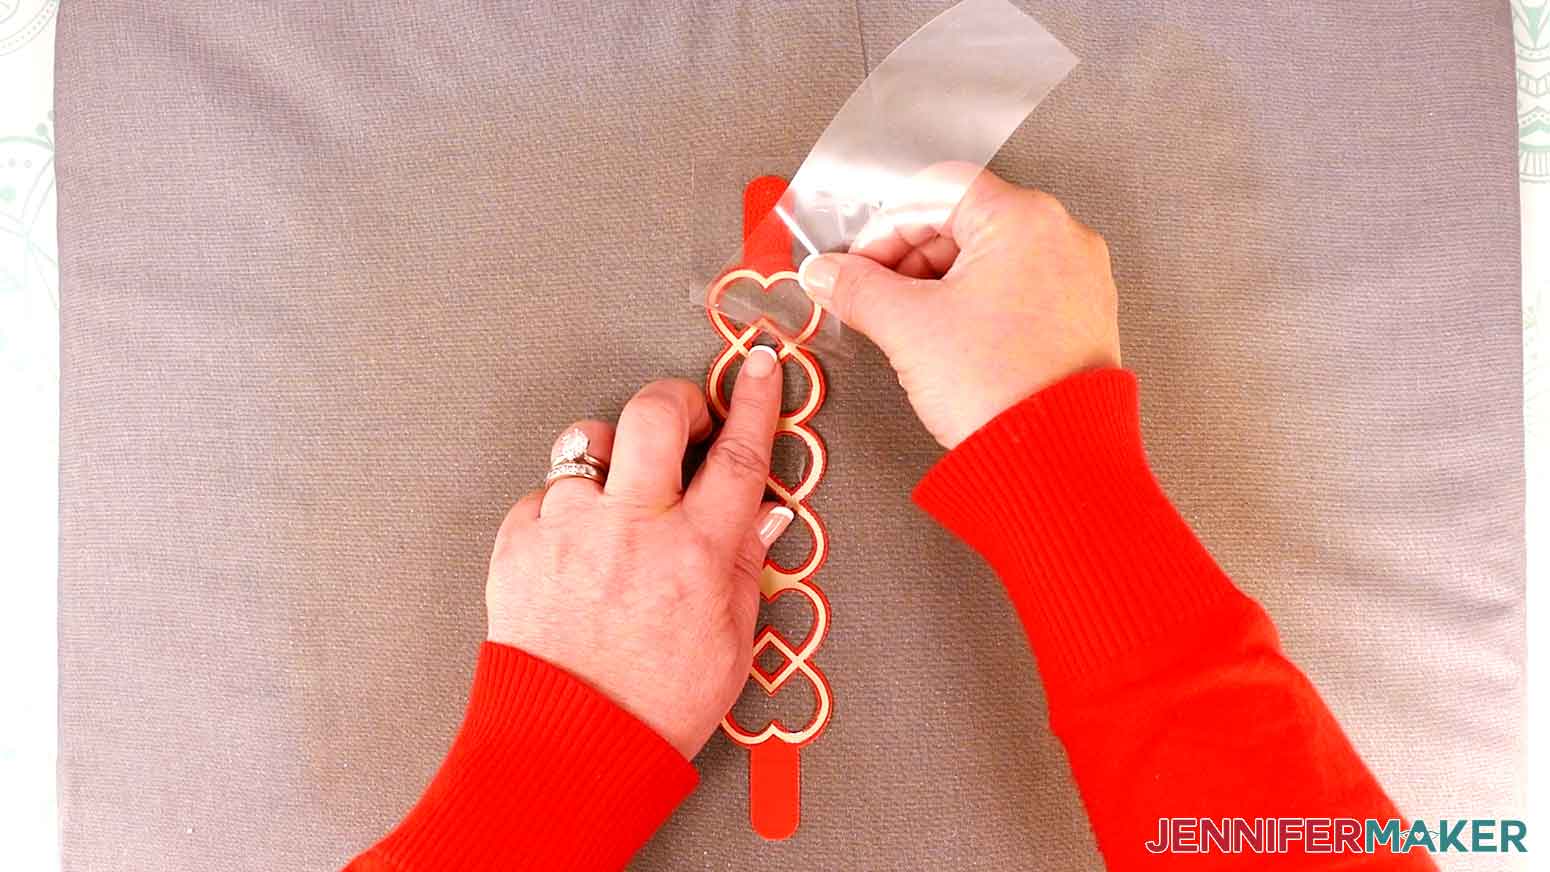 When cool, remove the iron-on vinyl carrier sheet from the bracelet.